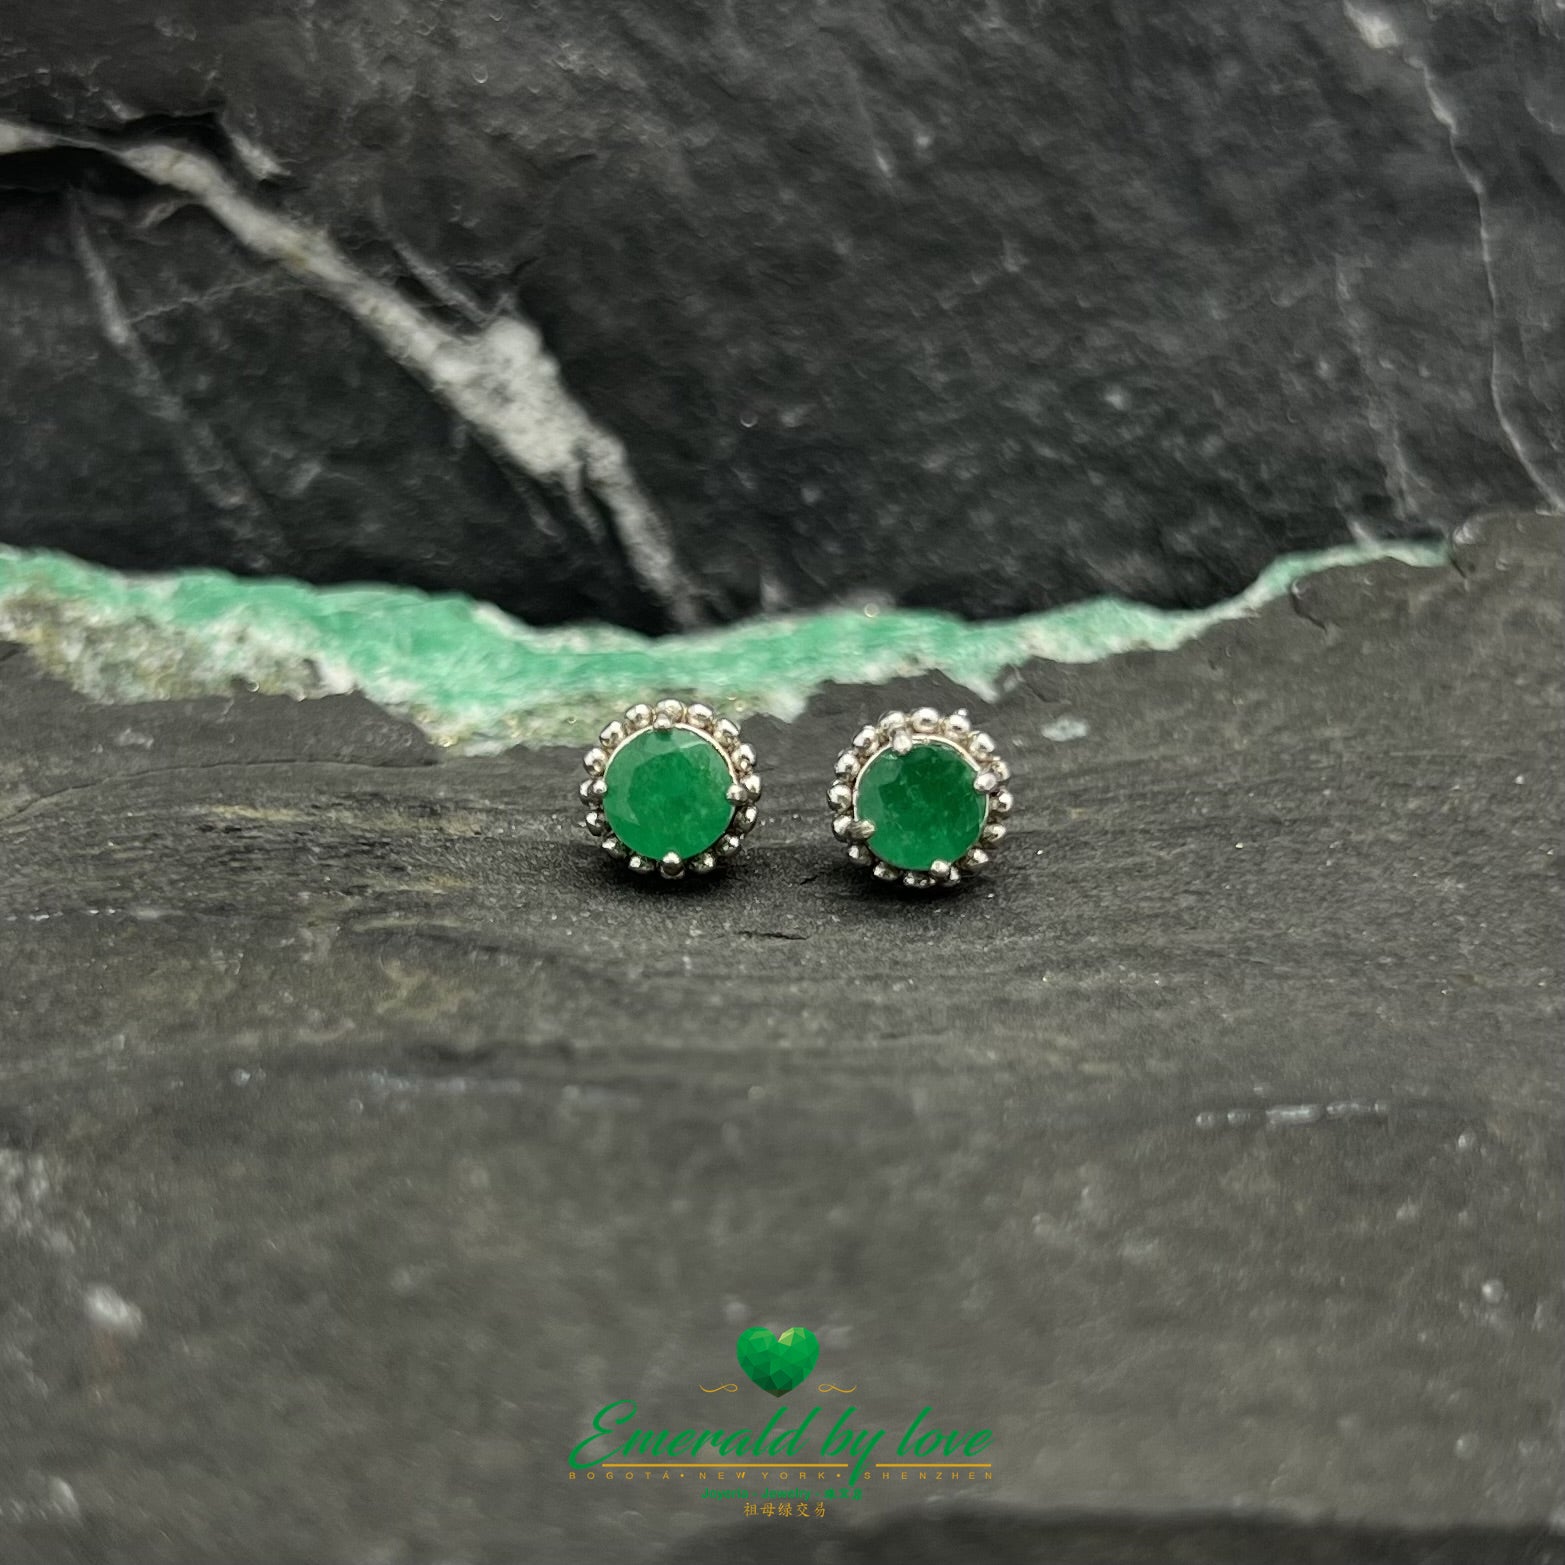 Delicate Sterling Silver Earrings with Round Emerald on a Floral Silver Bed